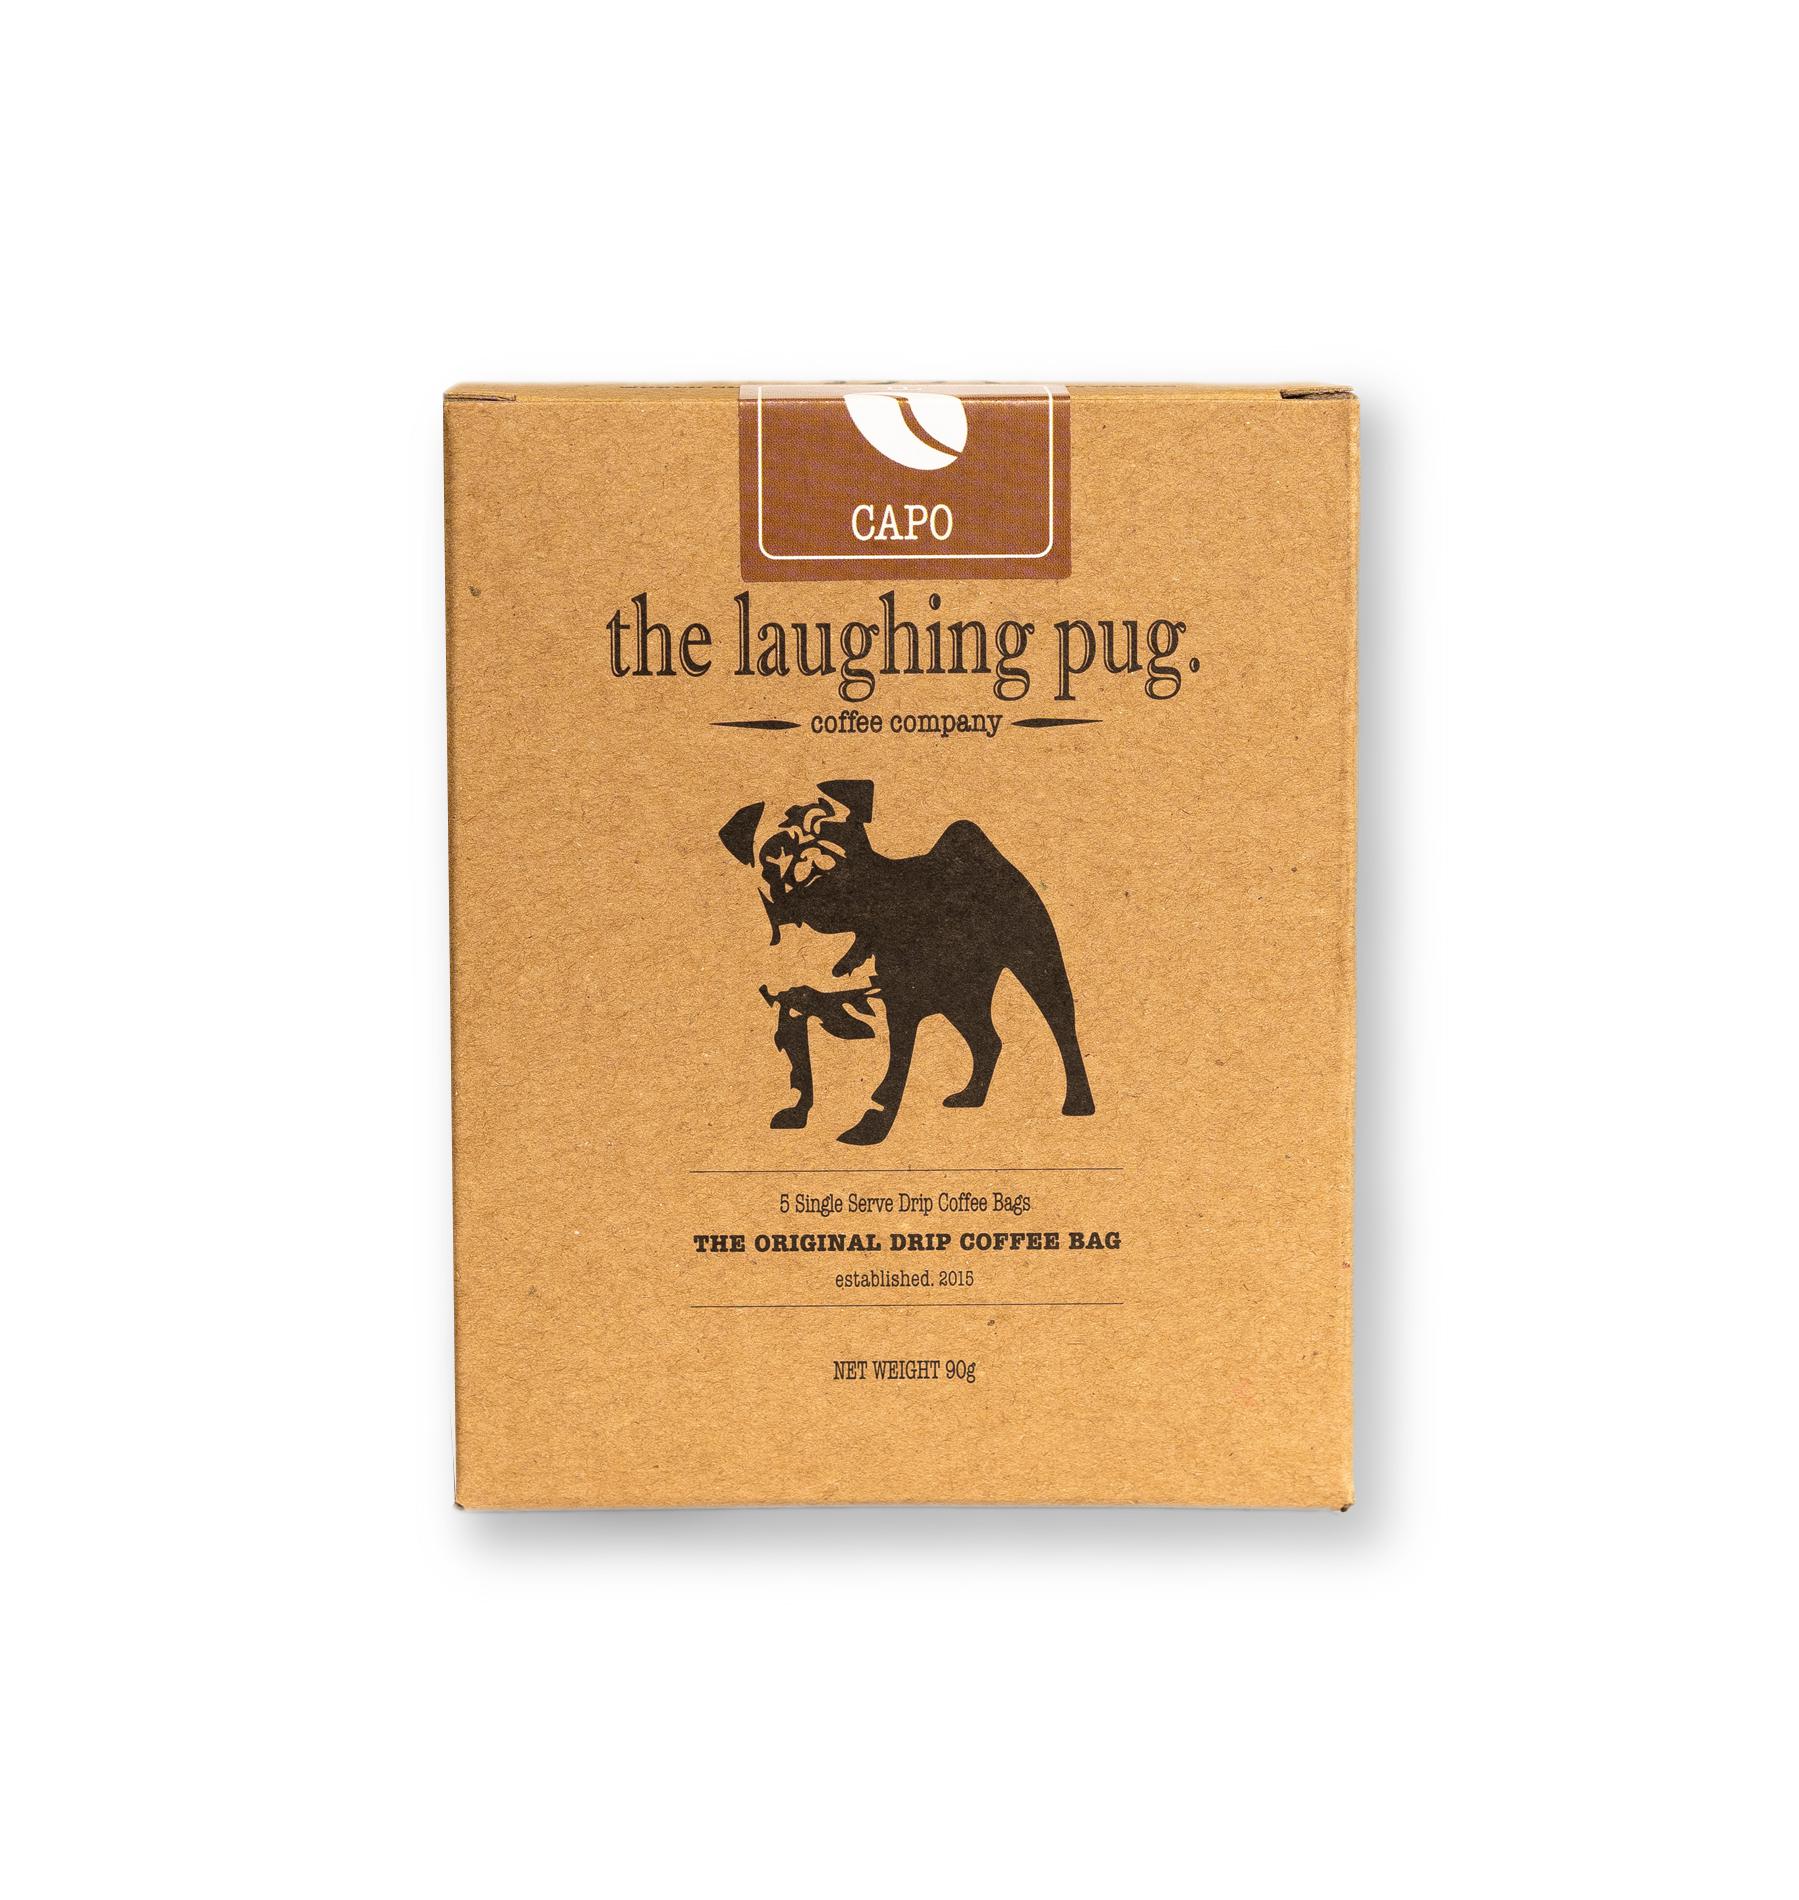 The Laughing Pug Individually foiled Drip Coffee Bags